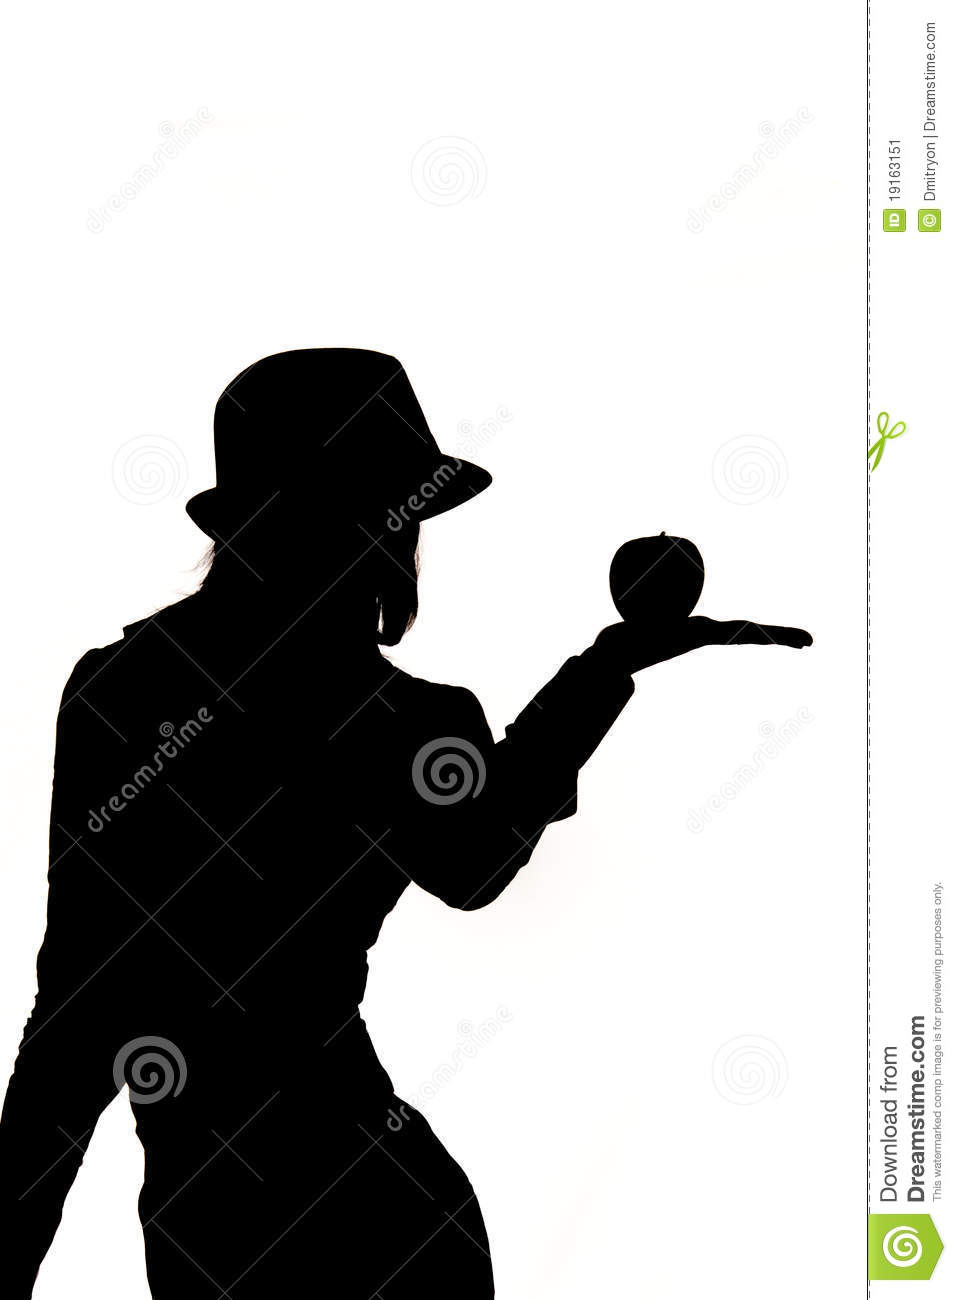 Woman Silhouette Holding An Apple Stock Image   Image  19163151